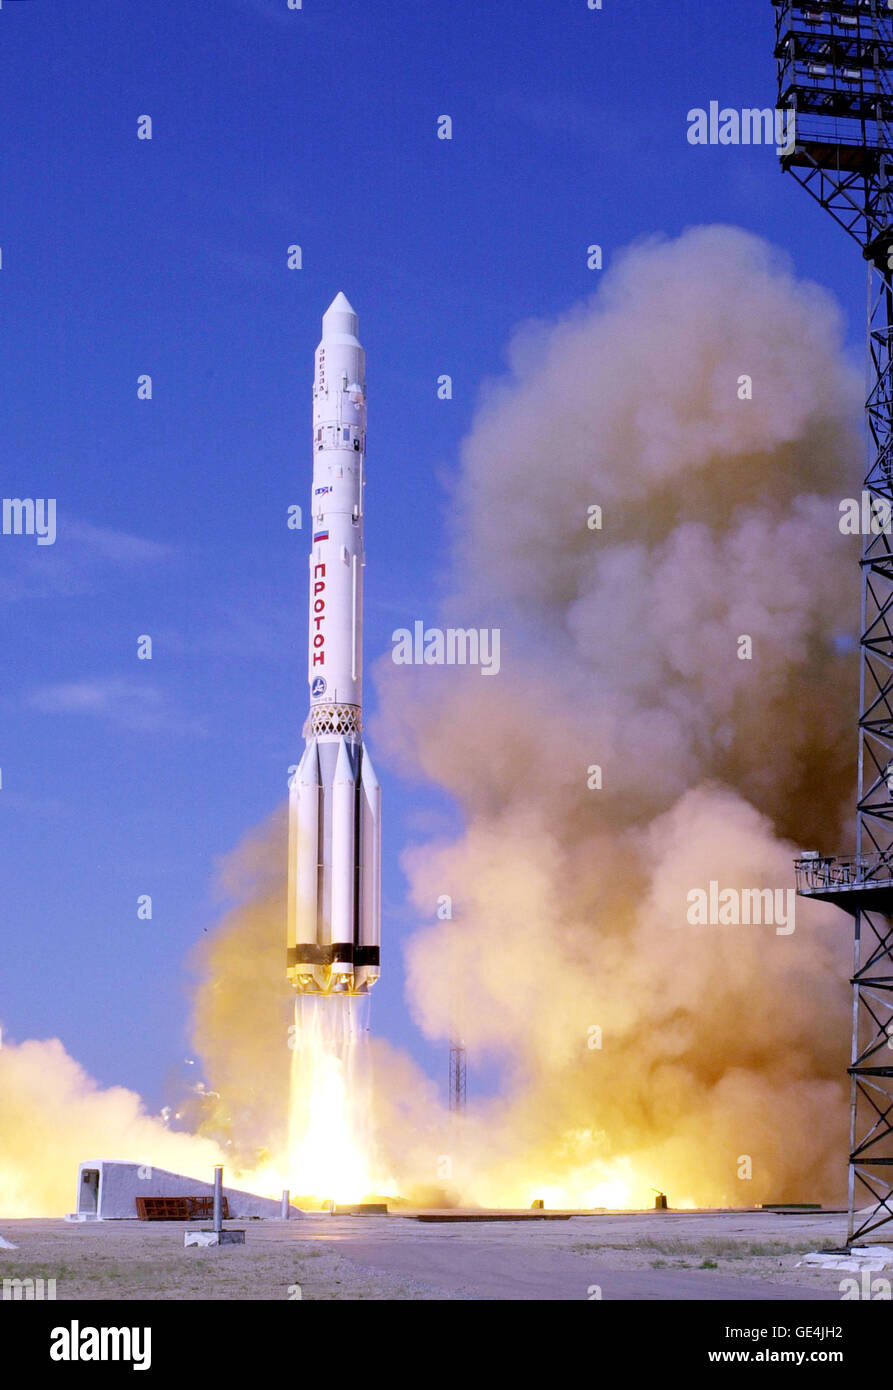 Photo credit; Scott Andrews/NASA   Caption; A proton  booster lifts off from the Bykanor Cosmodrome carrying the Zvesda, the third element of the International Space Staion   Date; 12 July, 2000 Stock Photo